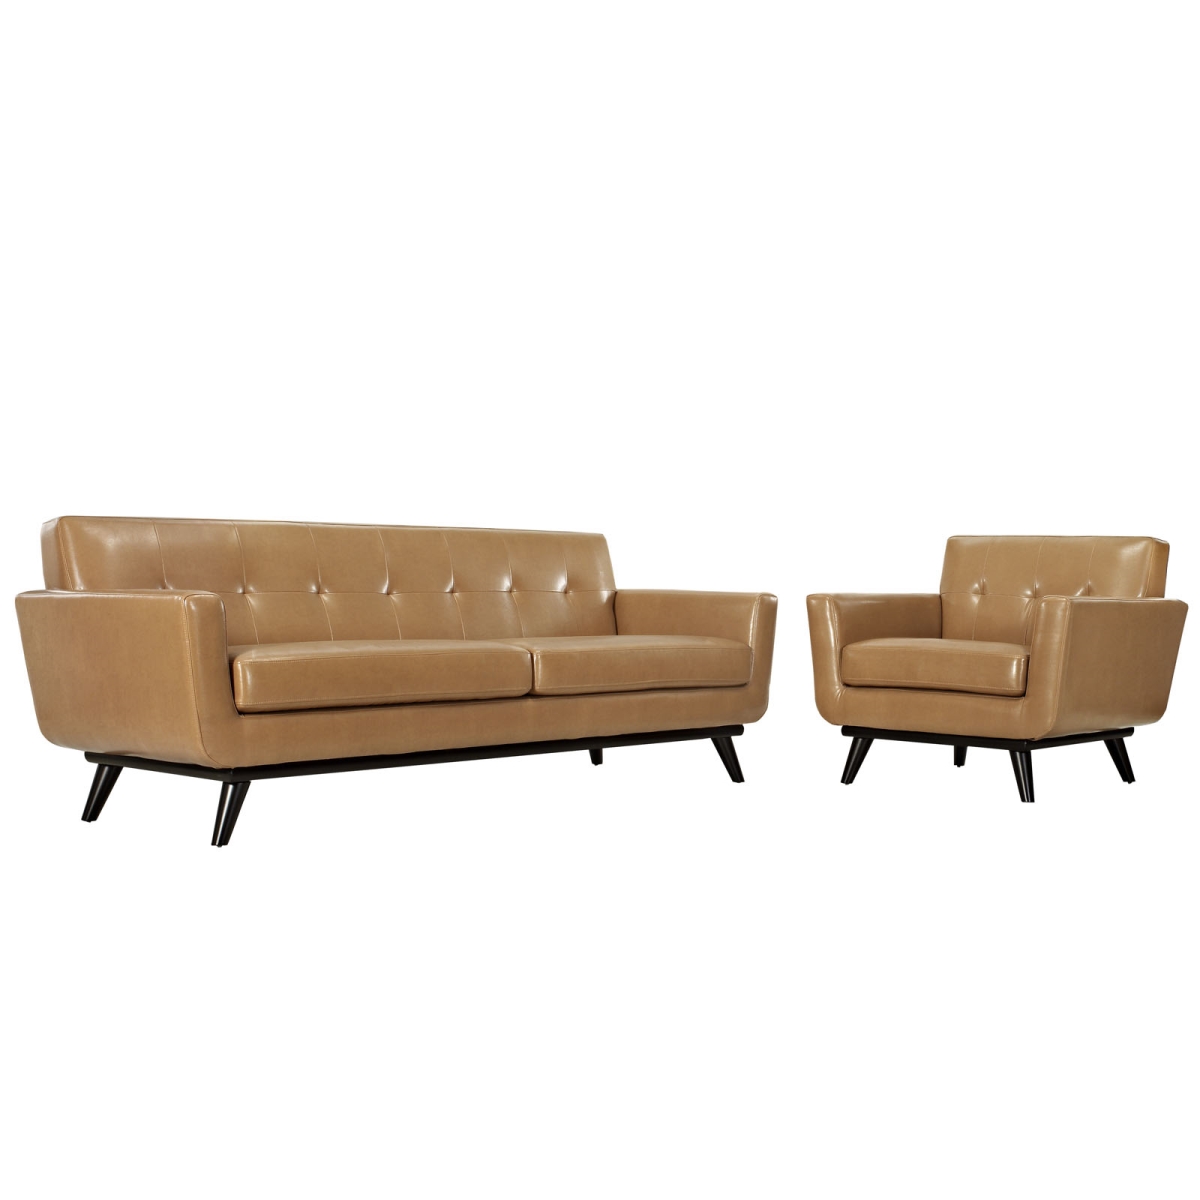 Eastend Eei-1766-tan-set Engage Sofa & Armchair Set In Tan Leather With Wood Legs